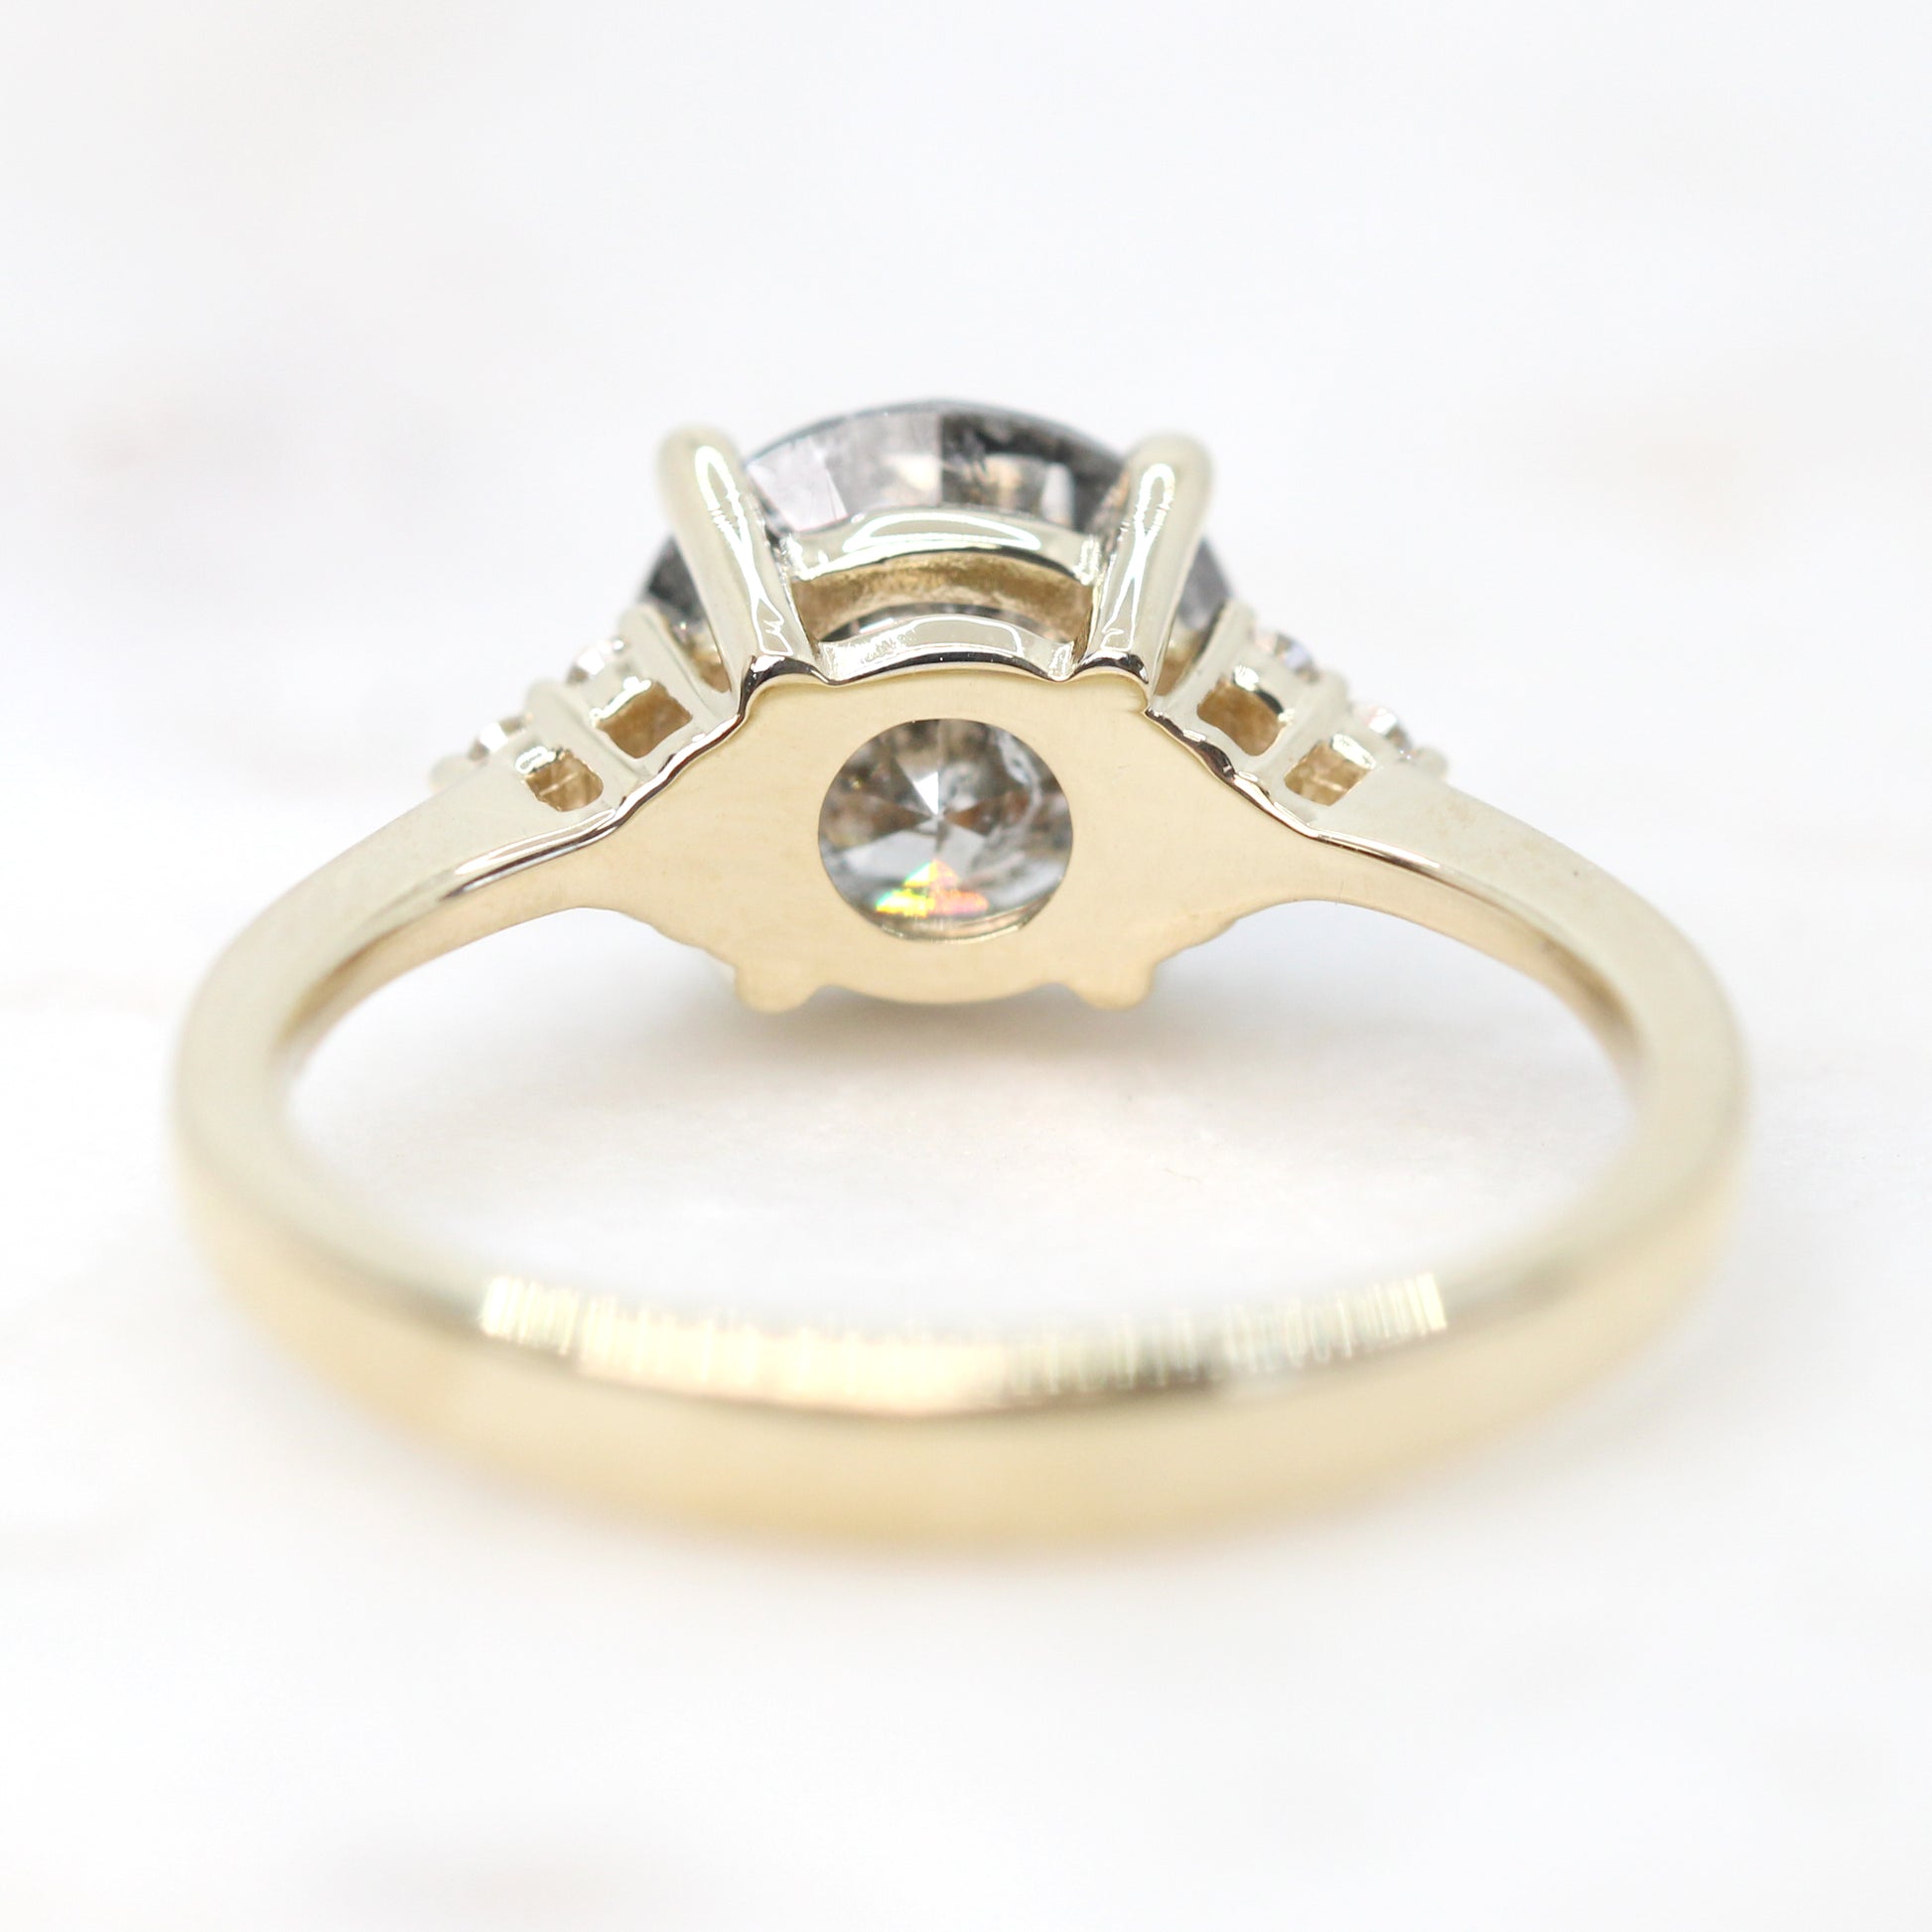 Imogene Ring with a 2.33 Carat Round Black Celestial Diamond and White Accent Diamonds in 14k Yellow Gold - Ready to Size and Ship - Midwinter Co. Alternative Bridal Rings and Modern Fine Jewelry